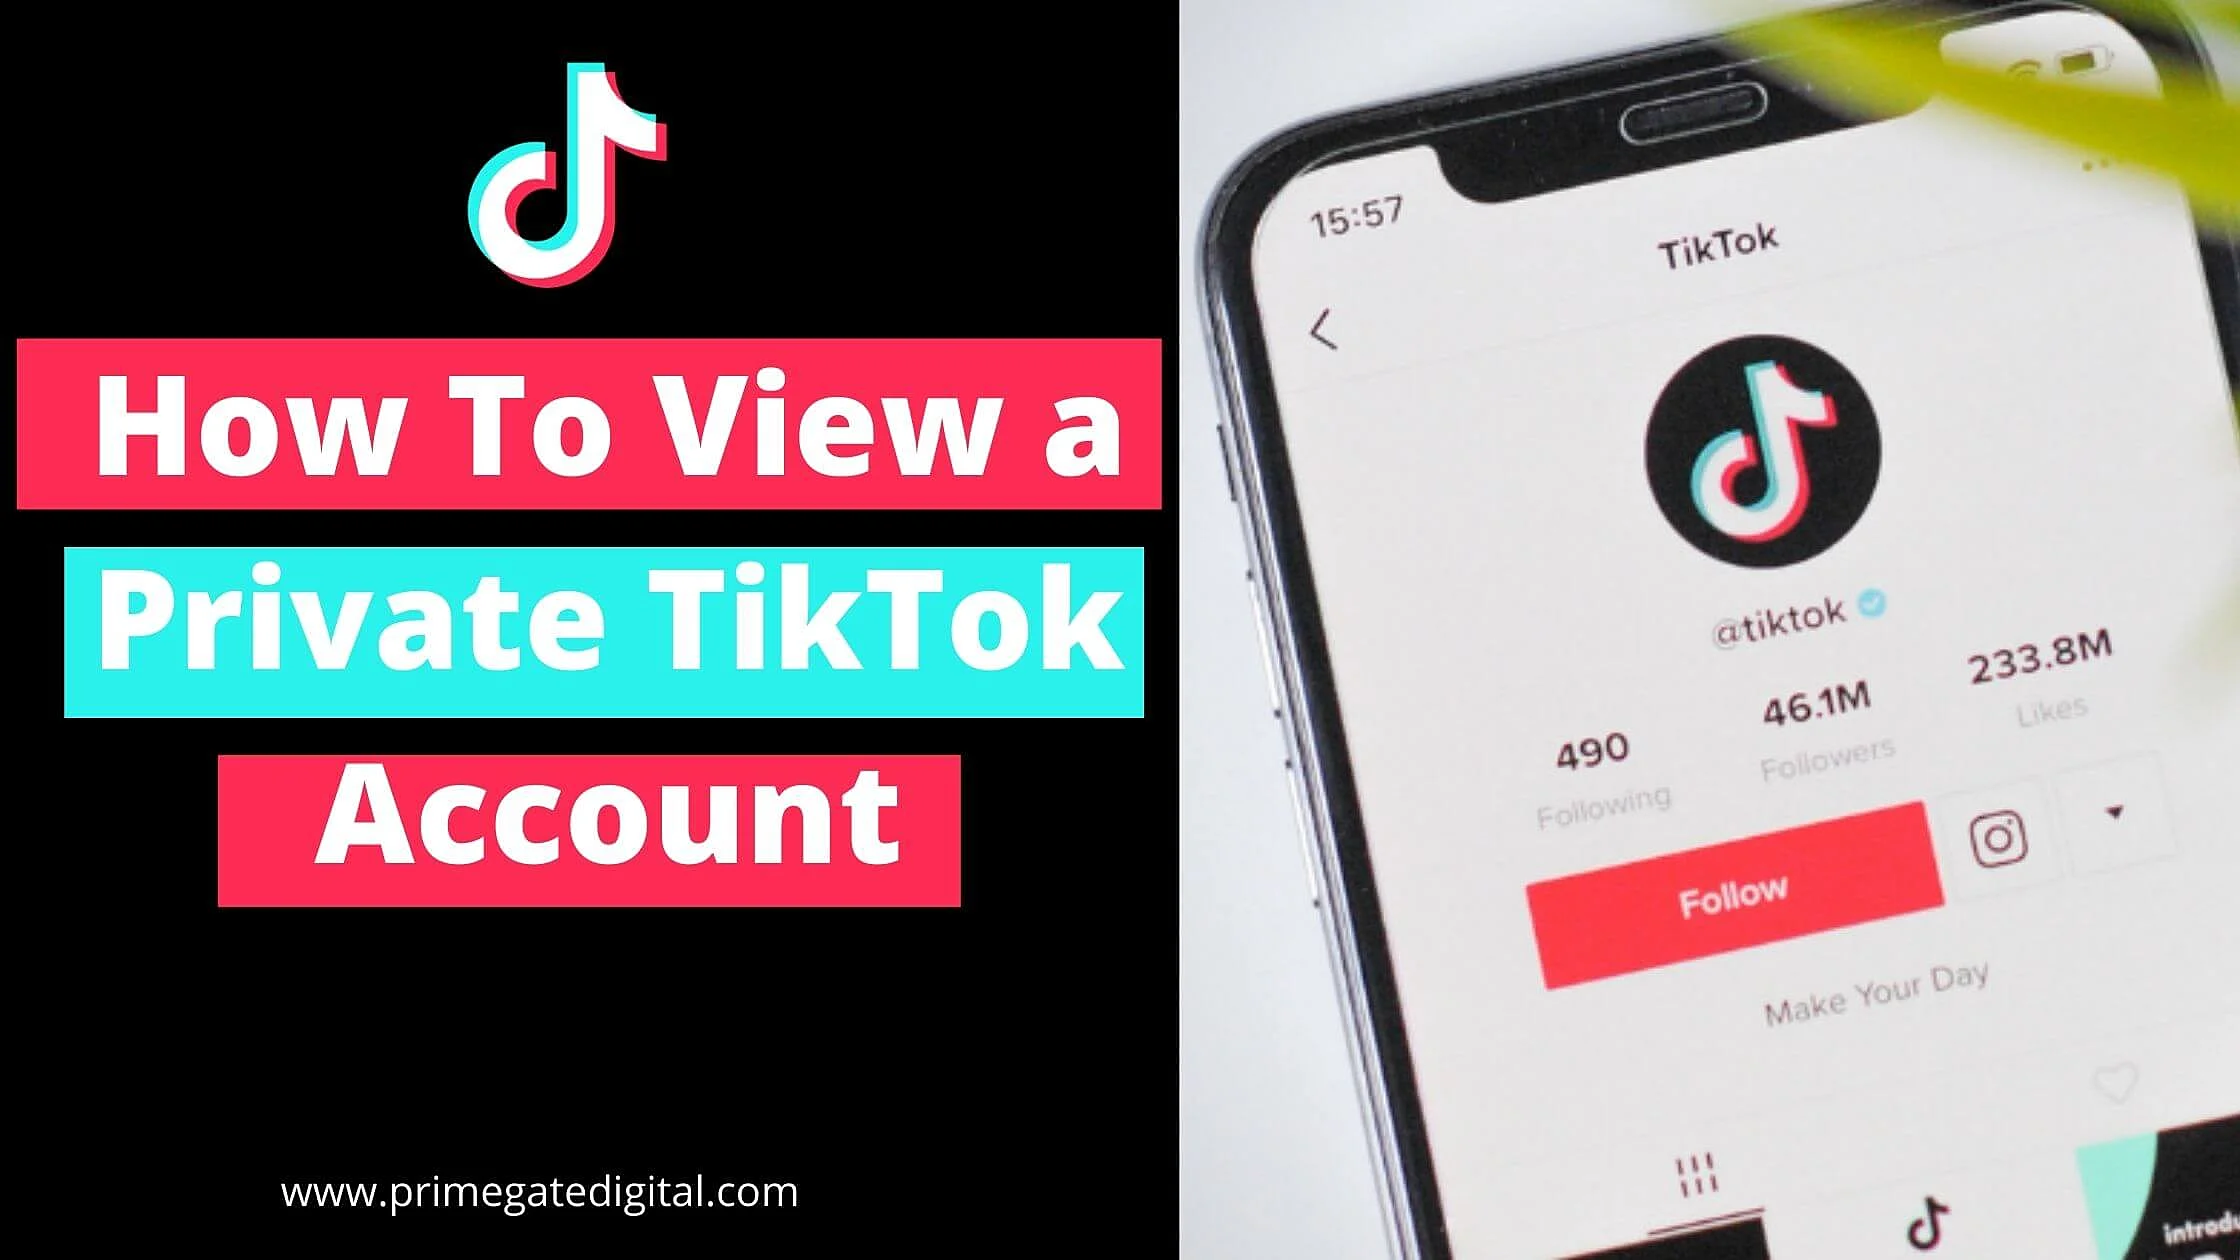 How to View a Private TikTok Account